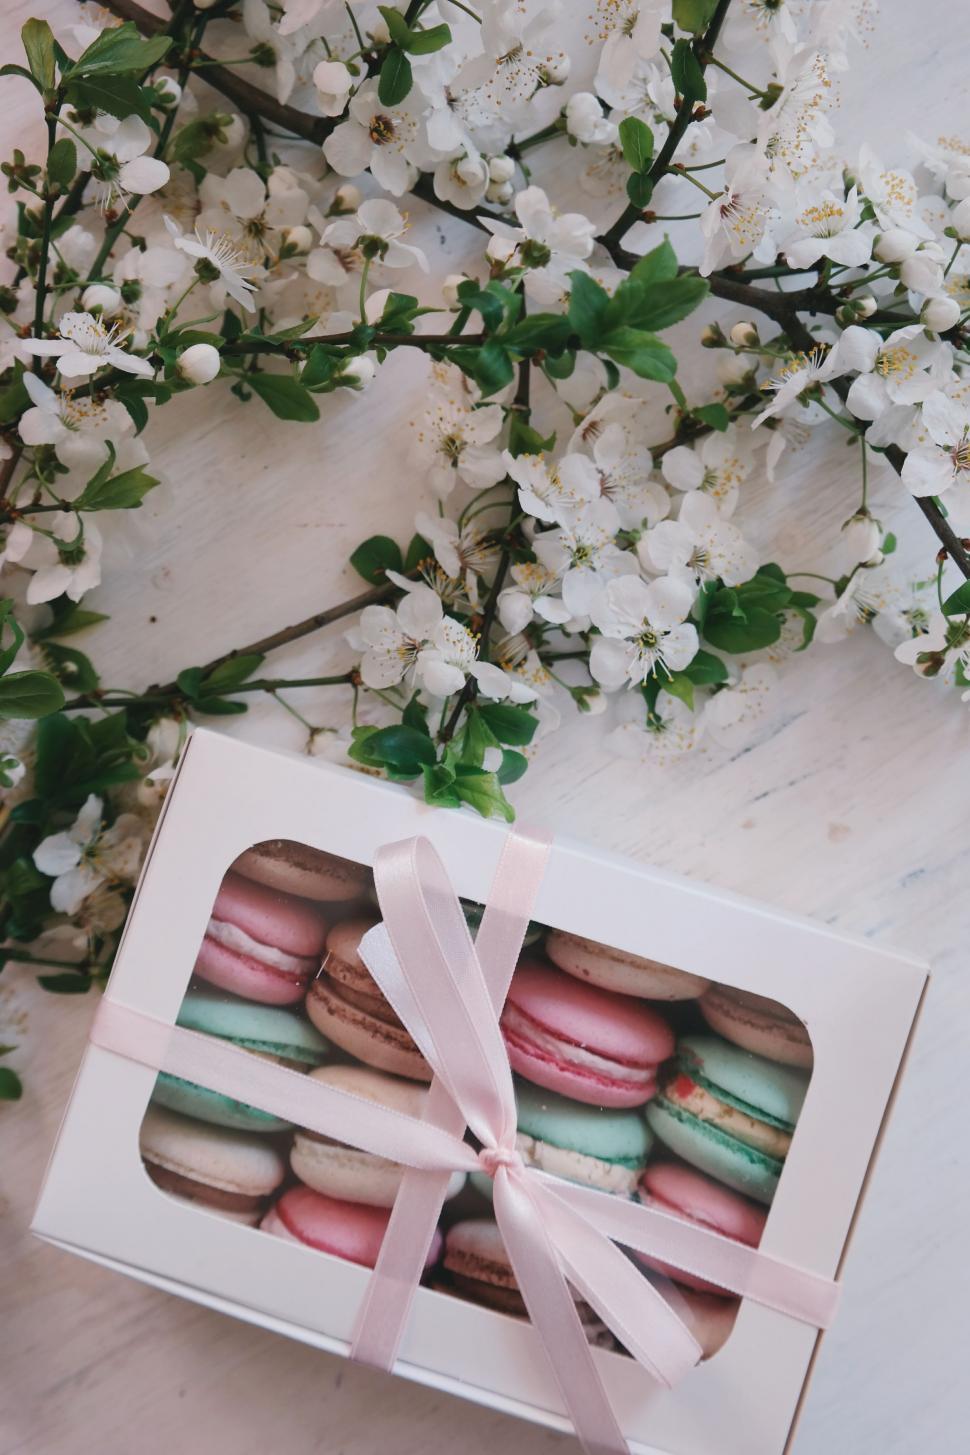 Free Image of Box of Macaroons With Pink Ribbon 